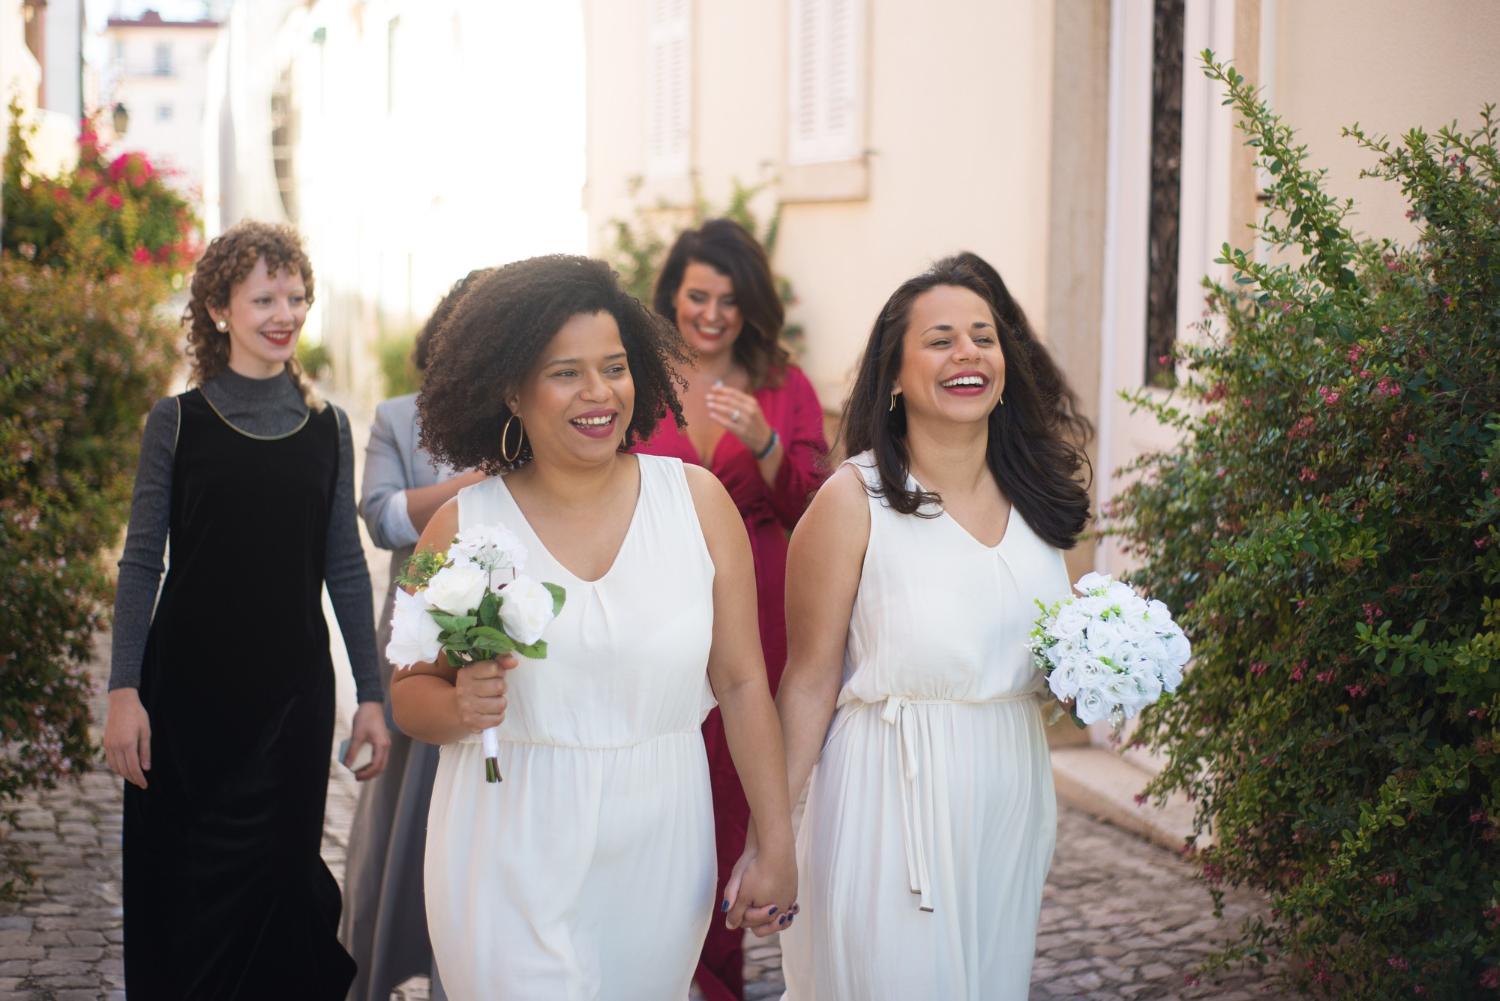 Do you want to have a successful same-sex wedding? Here are some basic things to keep in mind